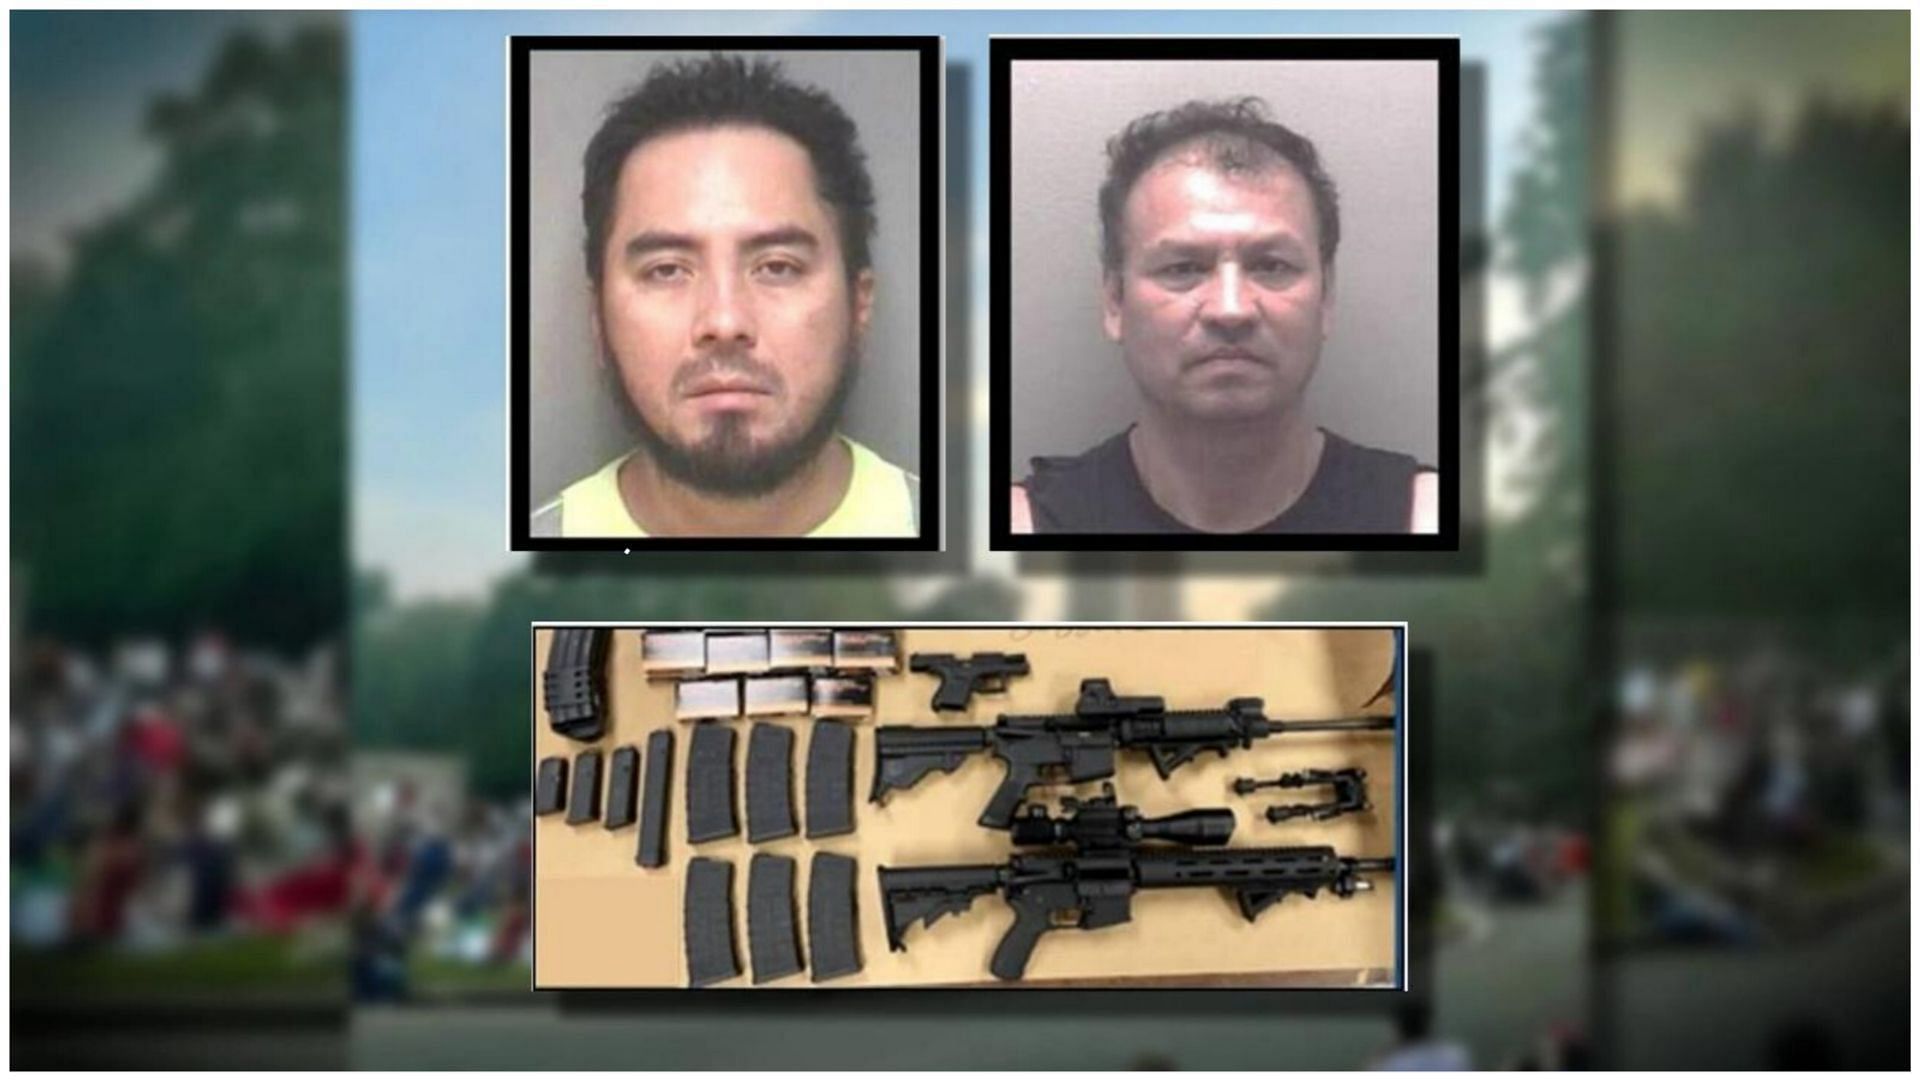 Rolman A. Balacarcel (Left) and Julio Alvarado-Dubon (Right) were arrested for planning the Fourth of July shooting (Image via Richmond PD)